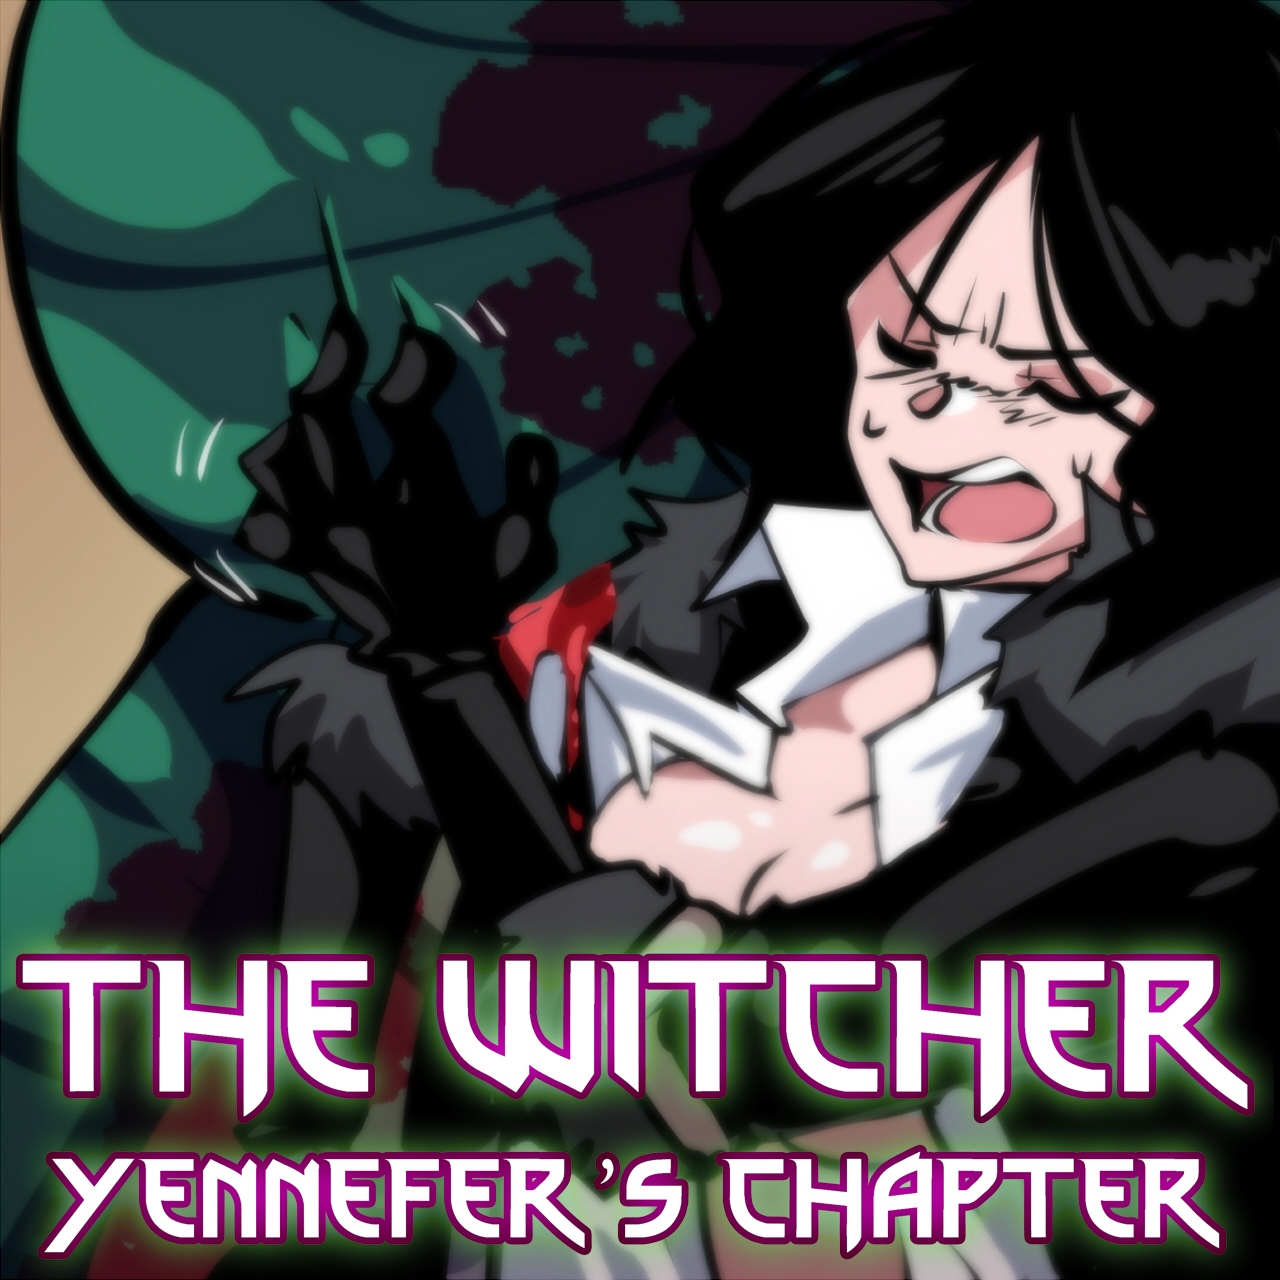 The Witcher: Yennefer's Chapter